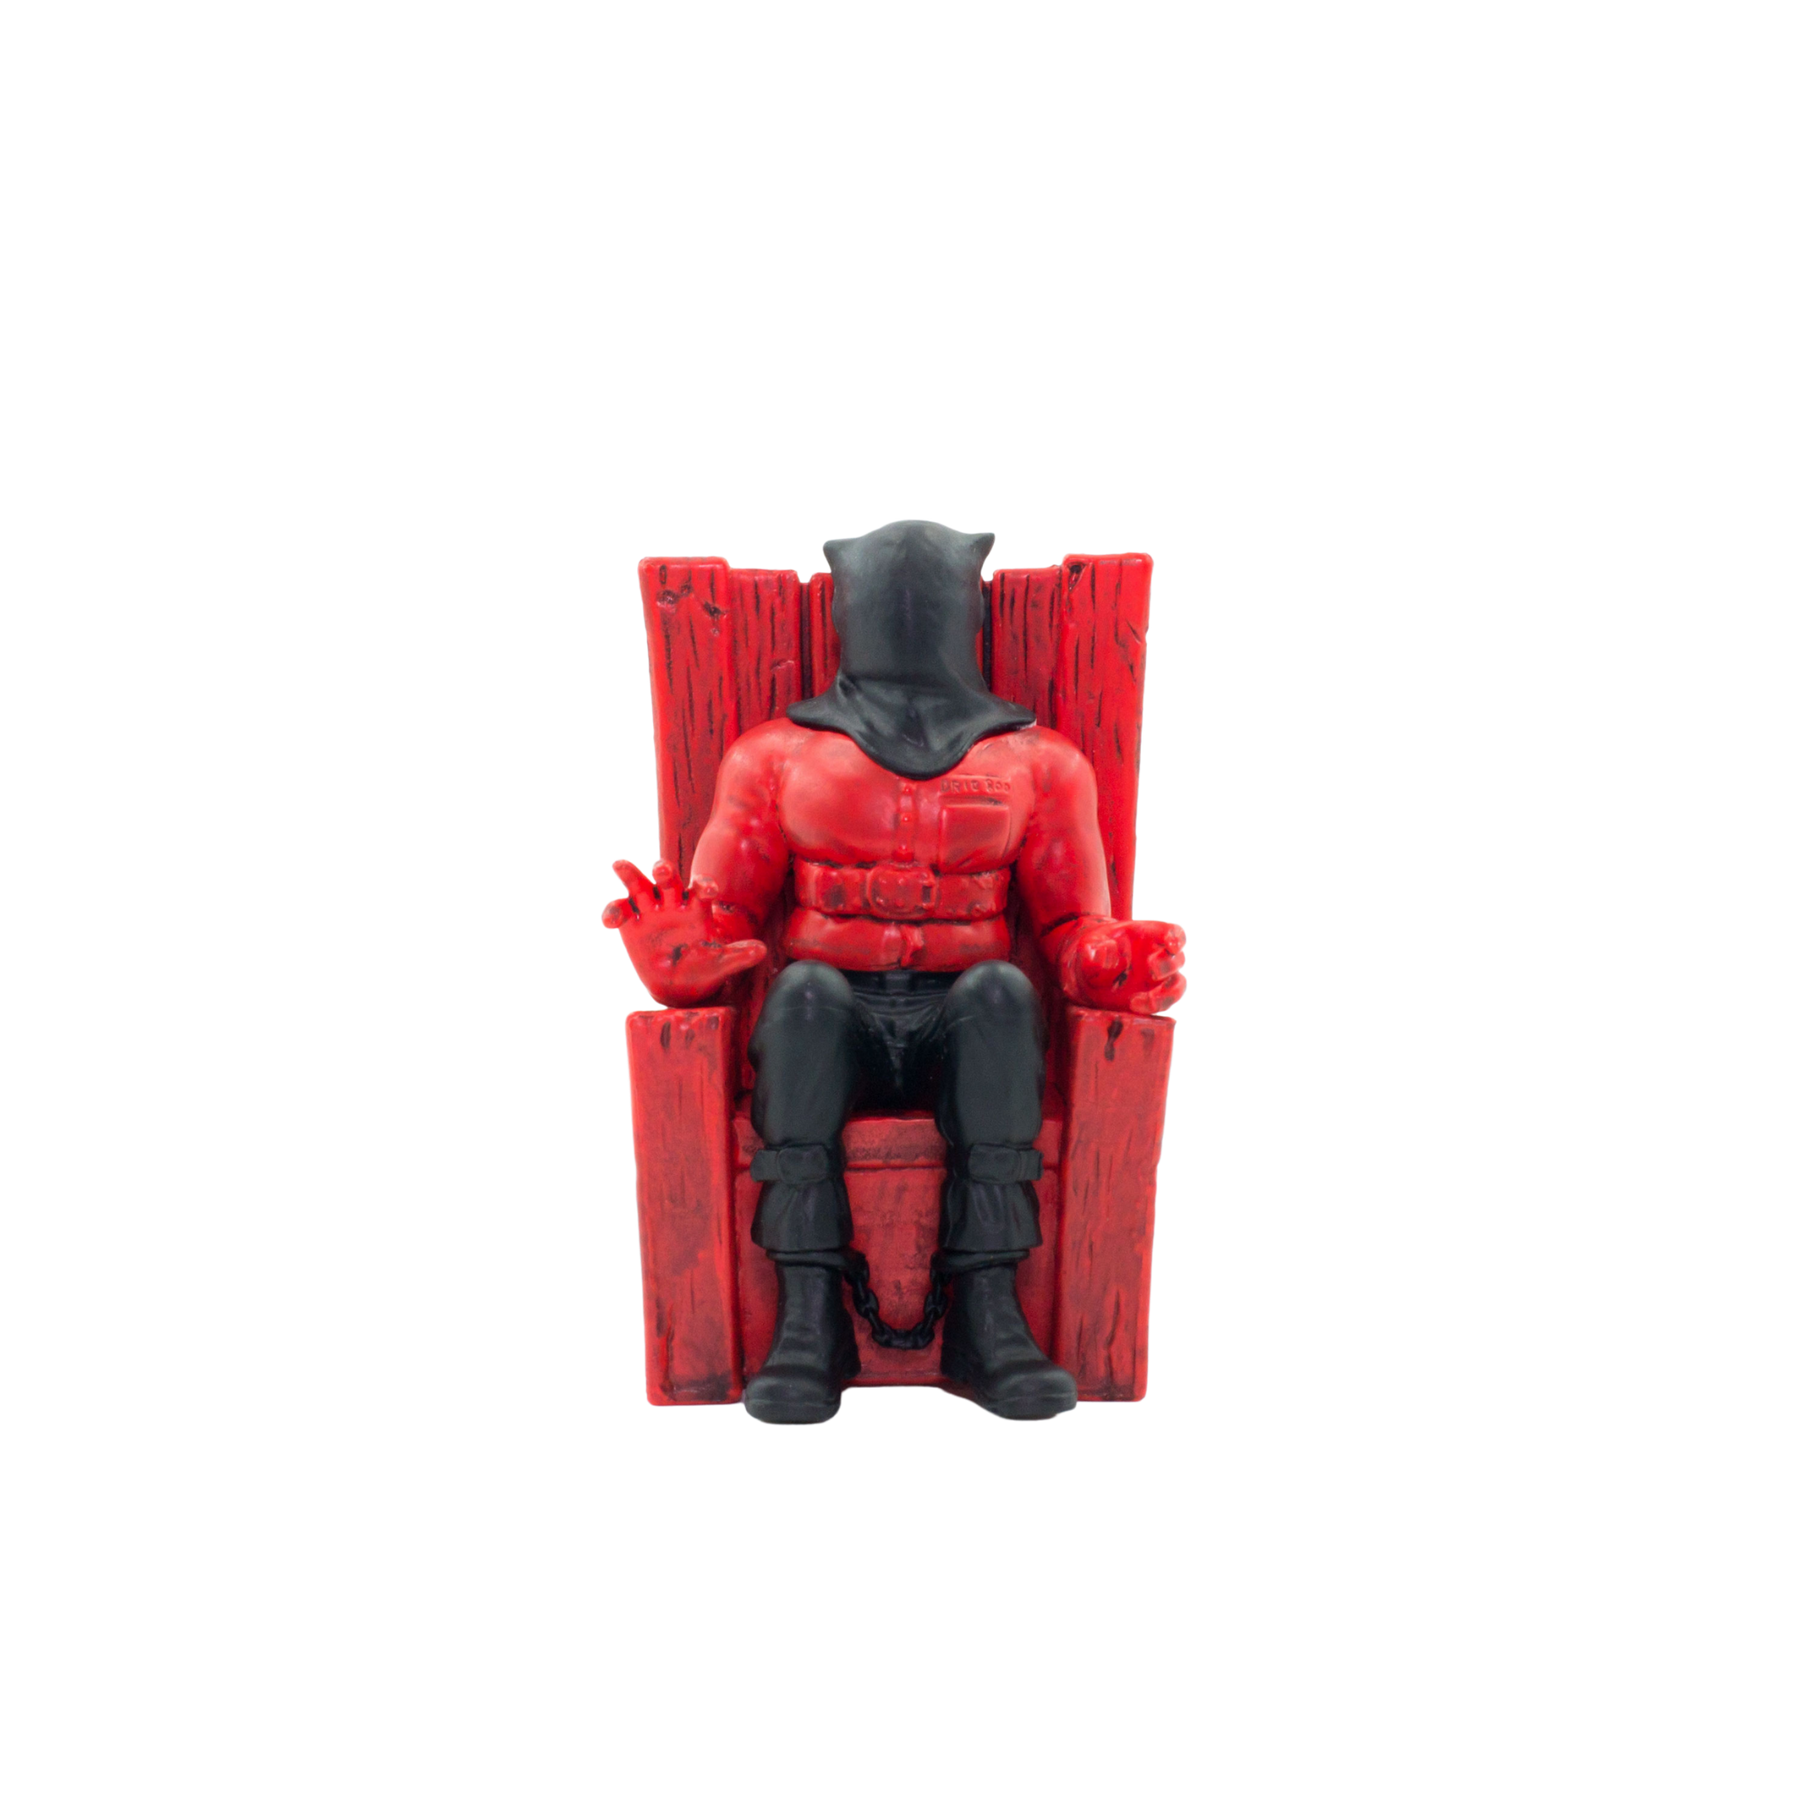 Death Row Records Official Store | Inmate Blind Box Figure